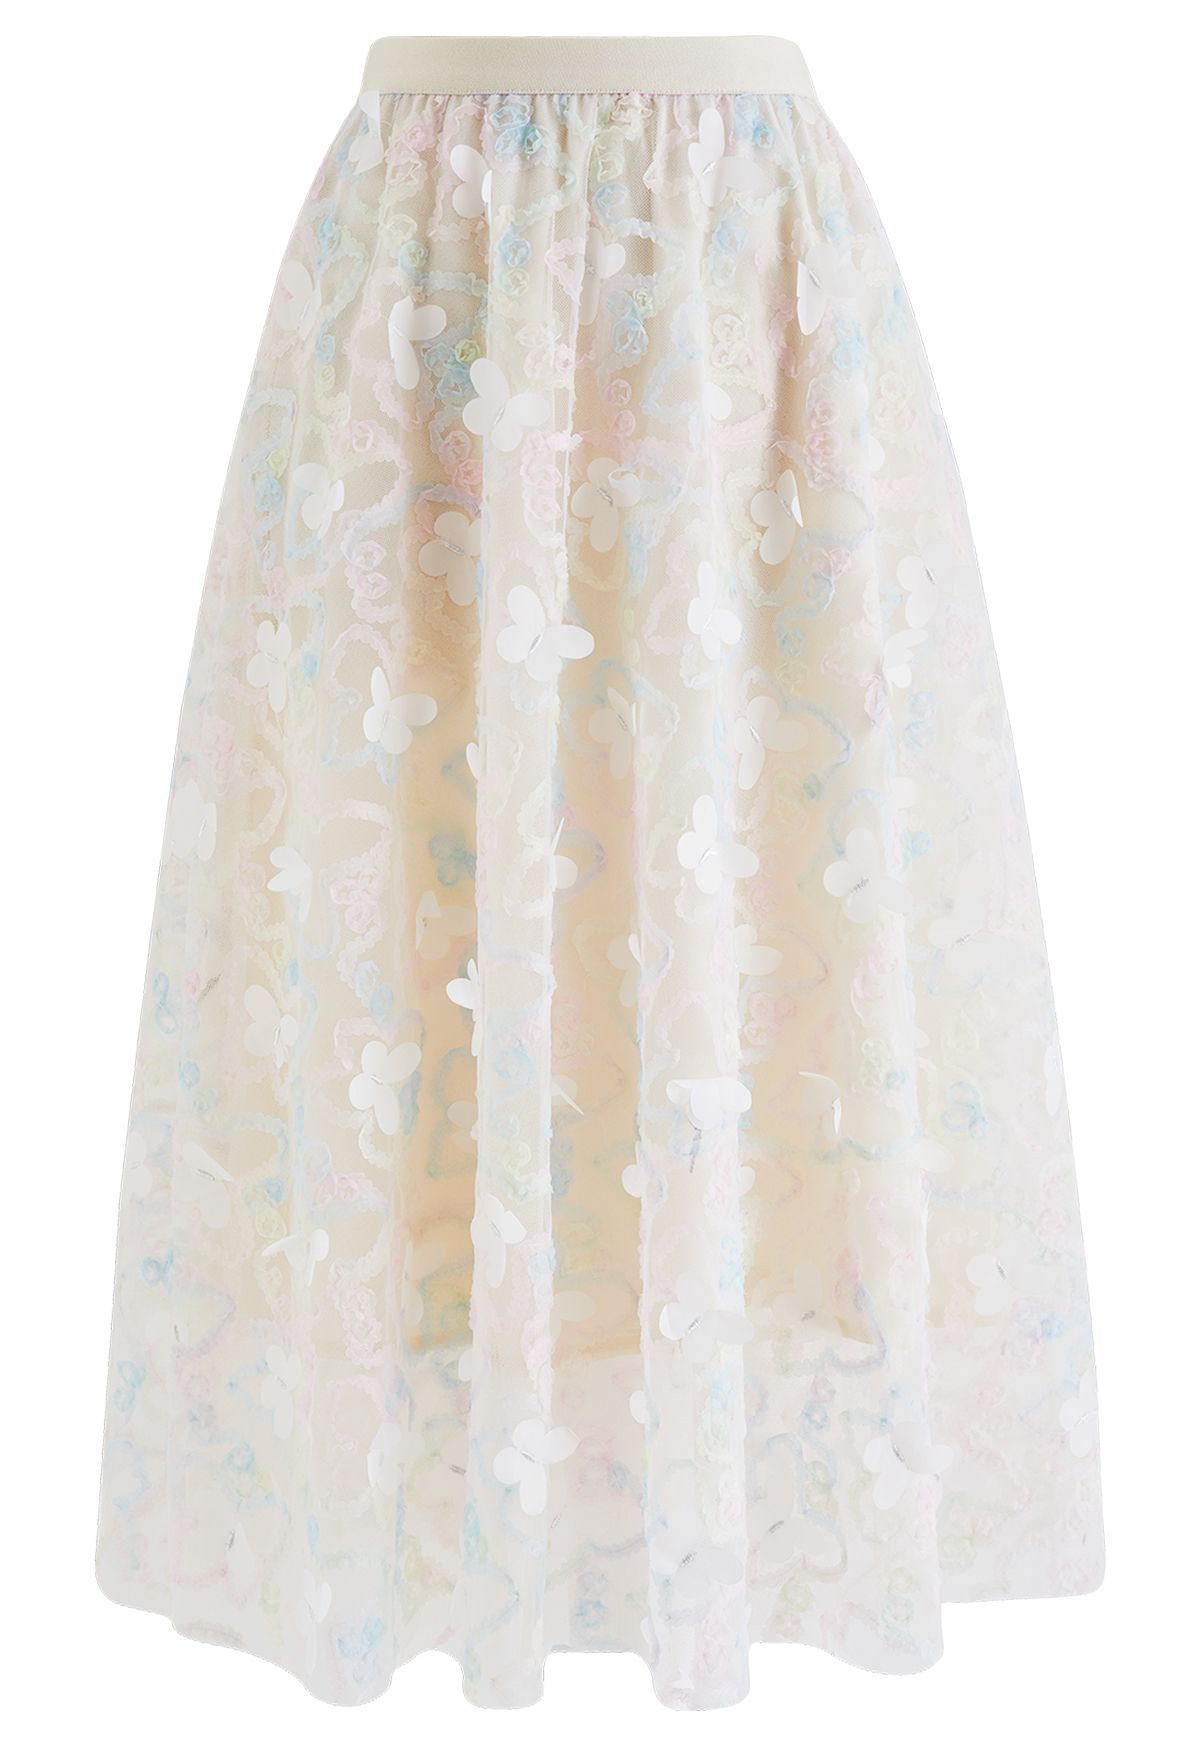 Lively Butterfly Mesh Tulle Skirt in Light Yellow | Chicwish